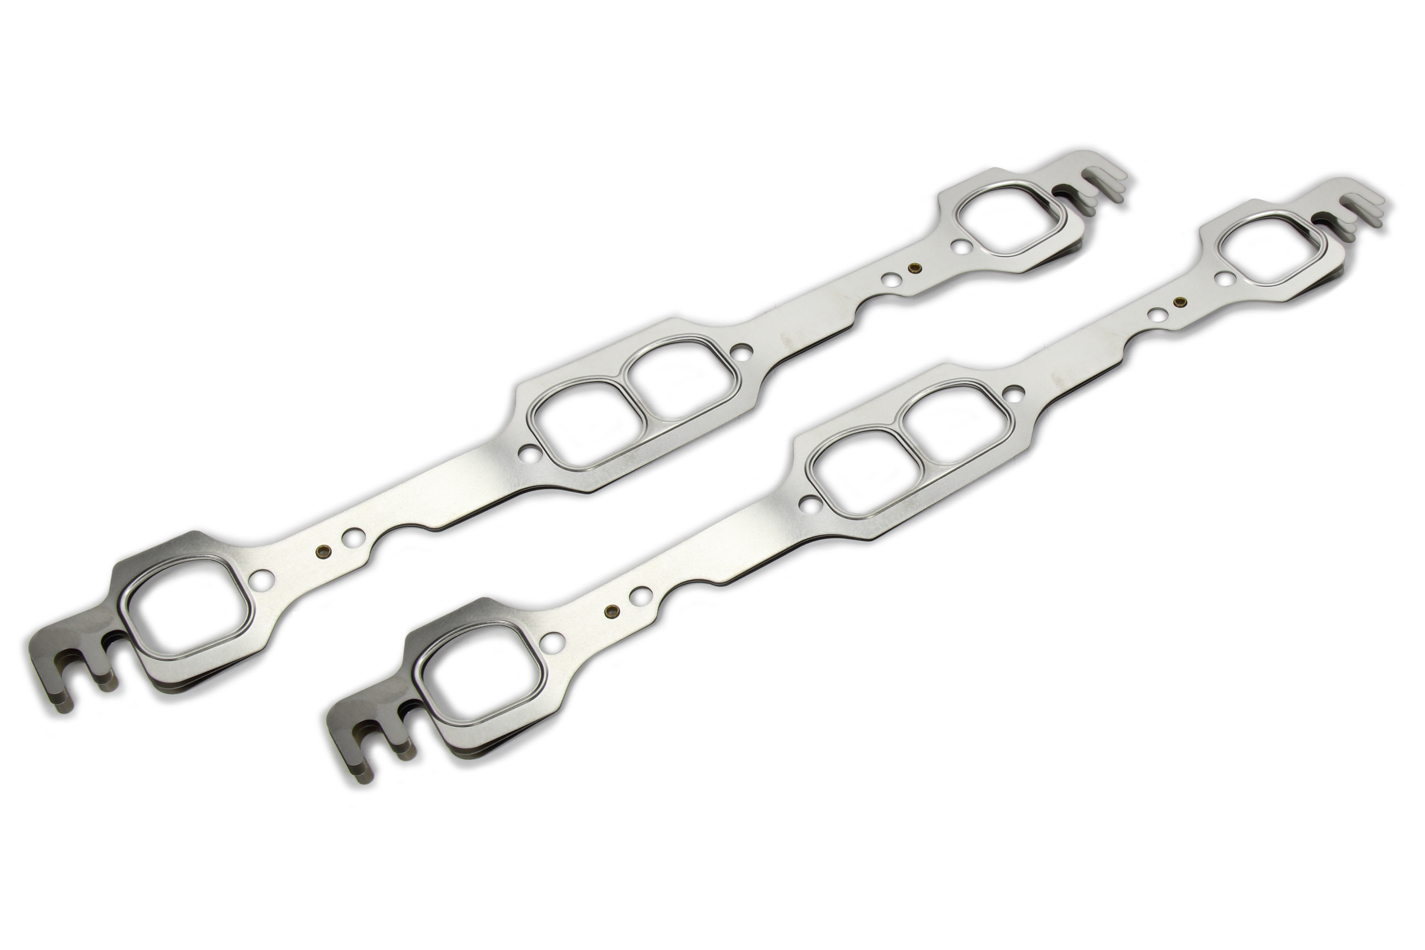 Cometic Gaskets C5895-030 - Exhaust Manifold / Header Gasket, 1.520 x 1.510 in D Port, Multi-Layer Steel, Small Block Chevy, Pair